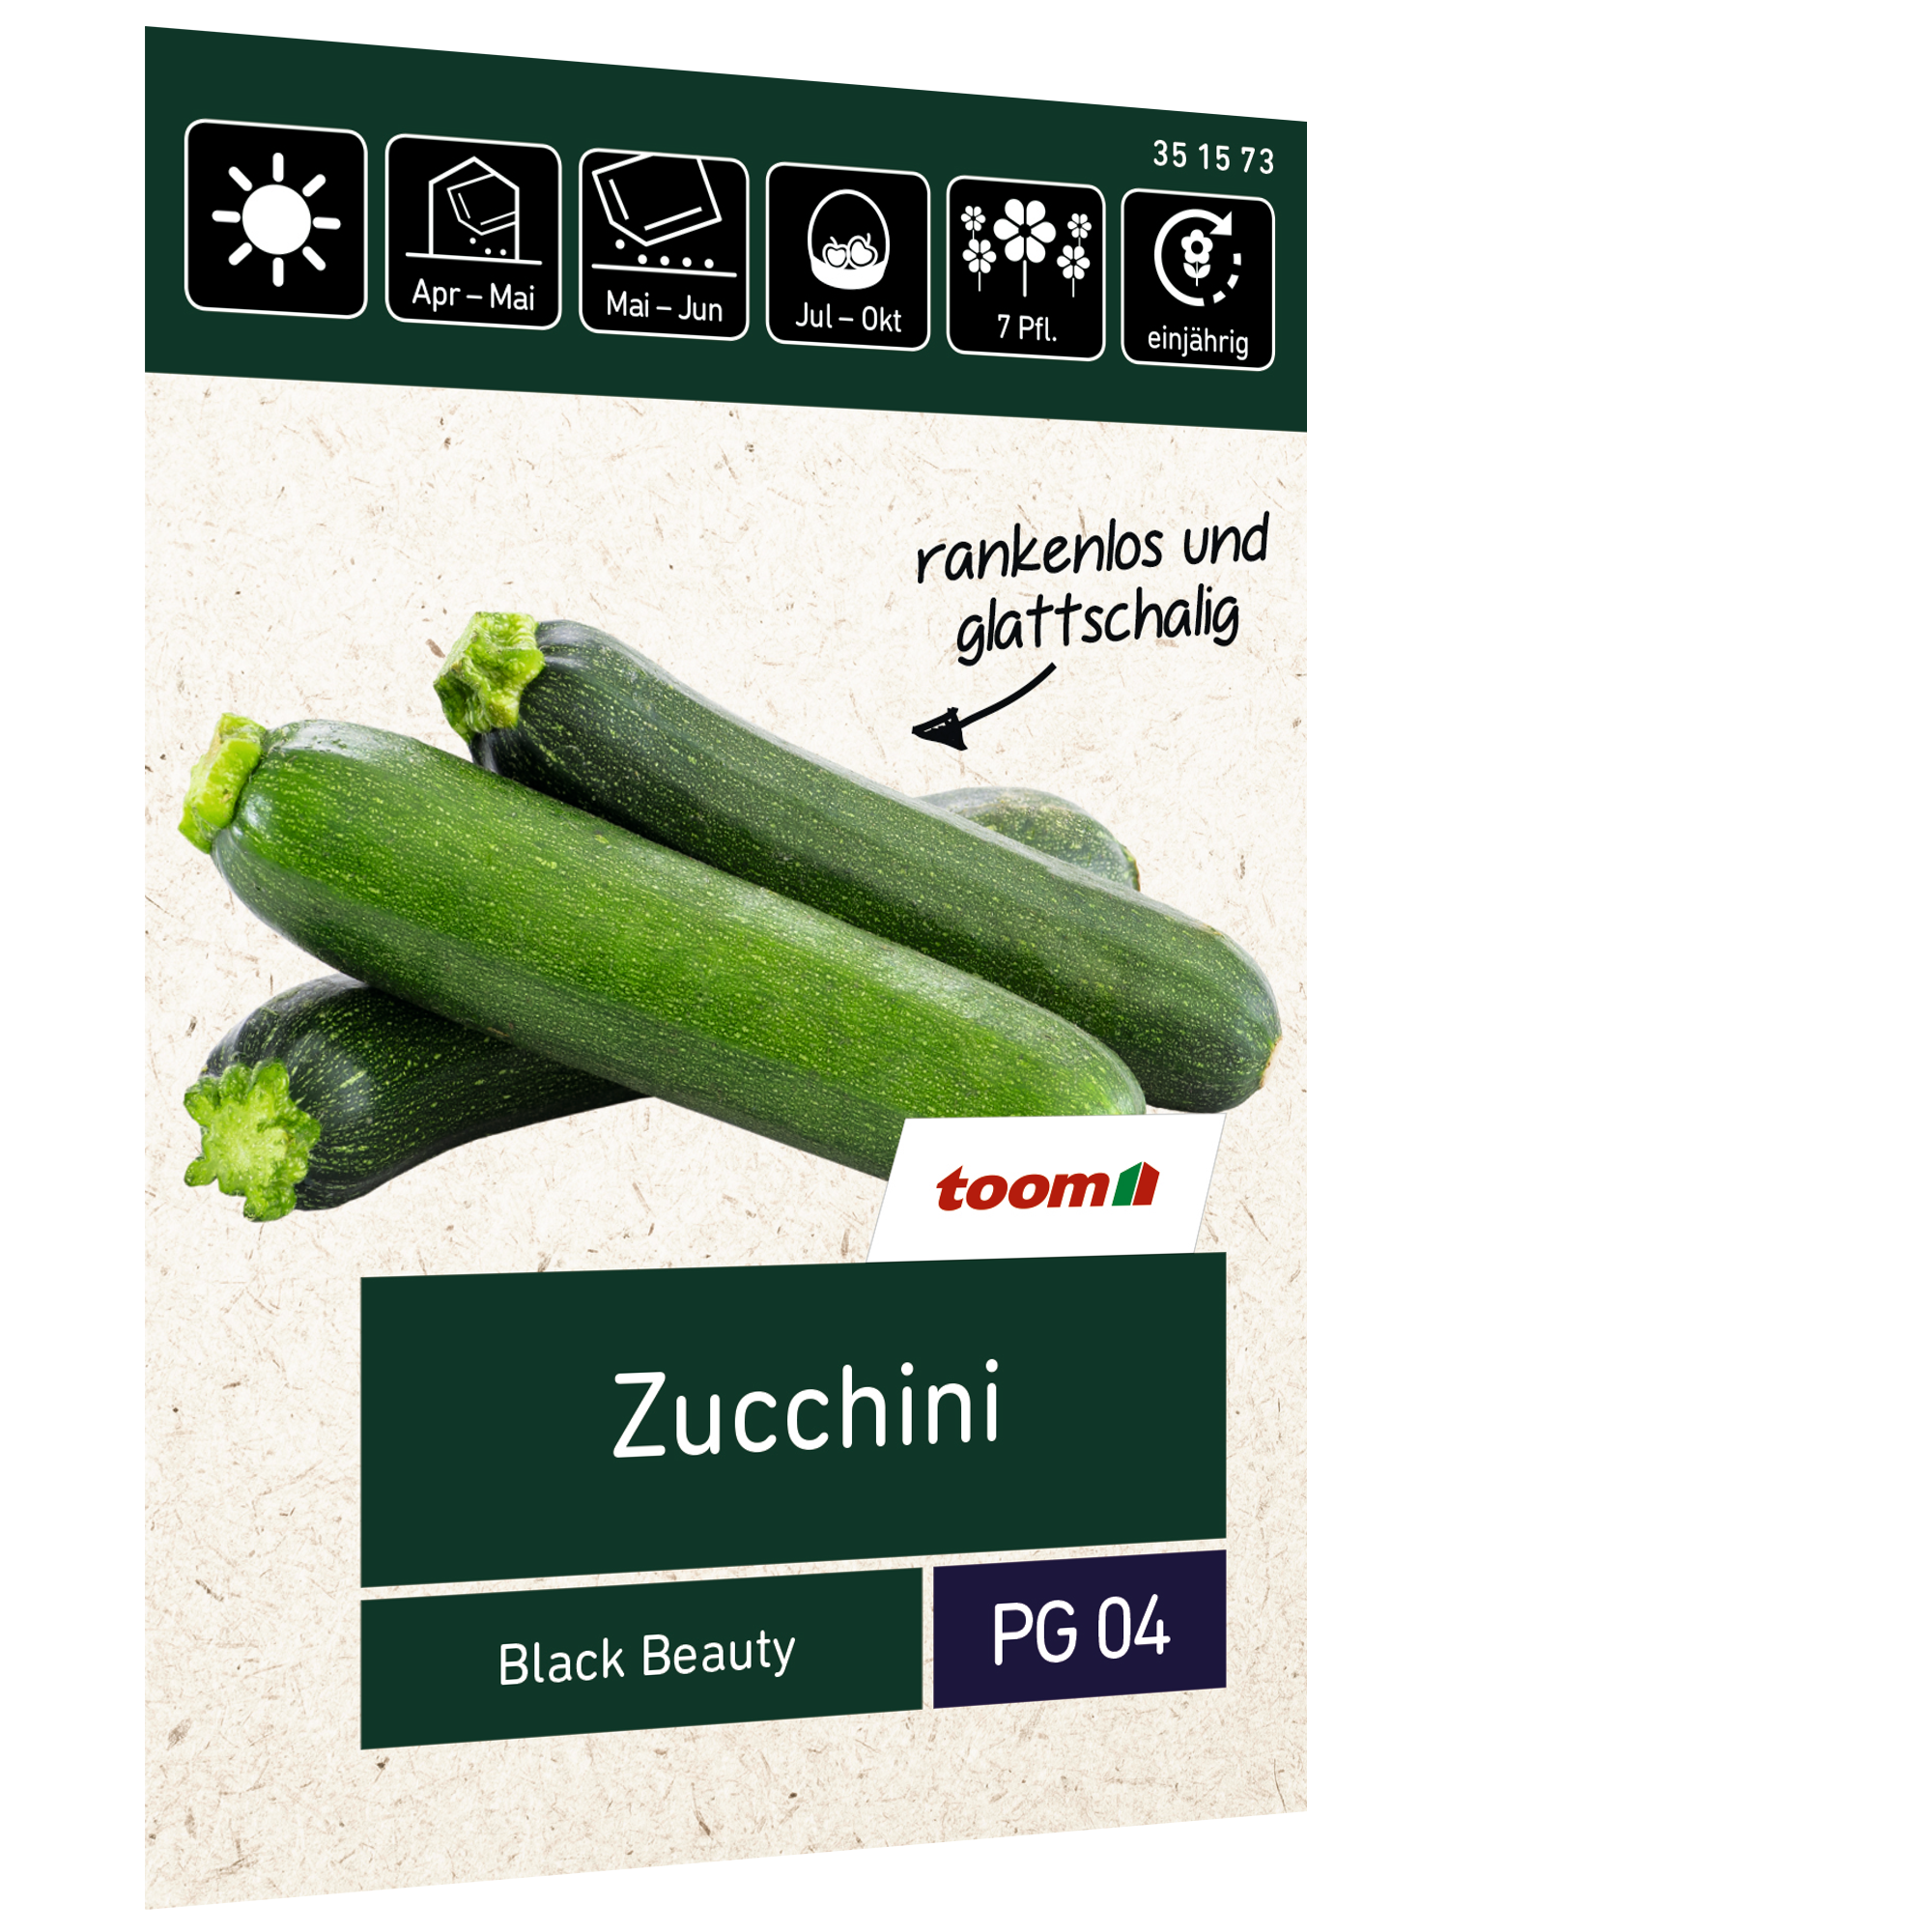 Zucchini 'Black Beauty' + product picture